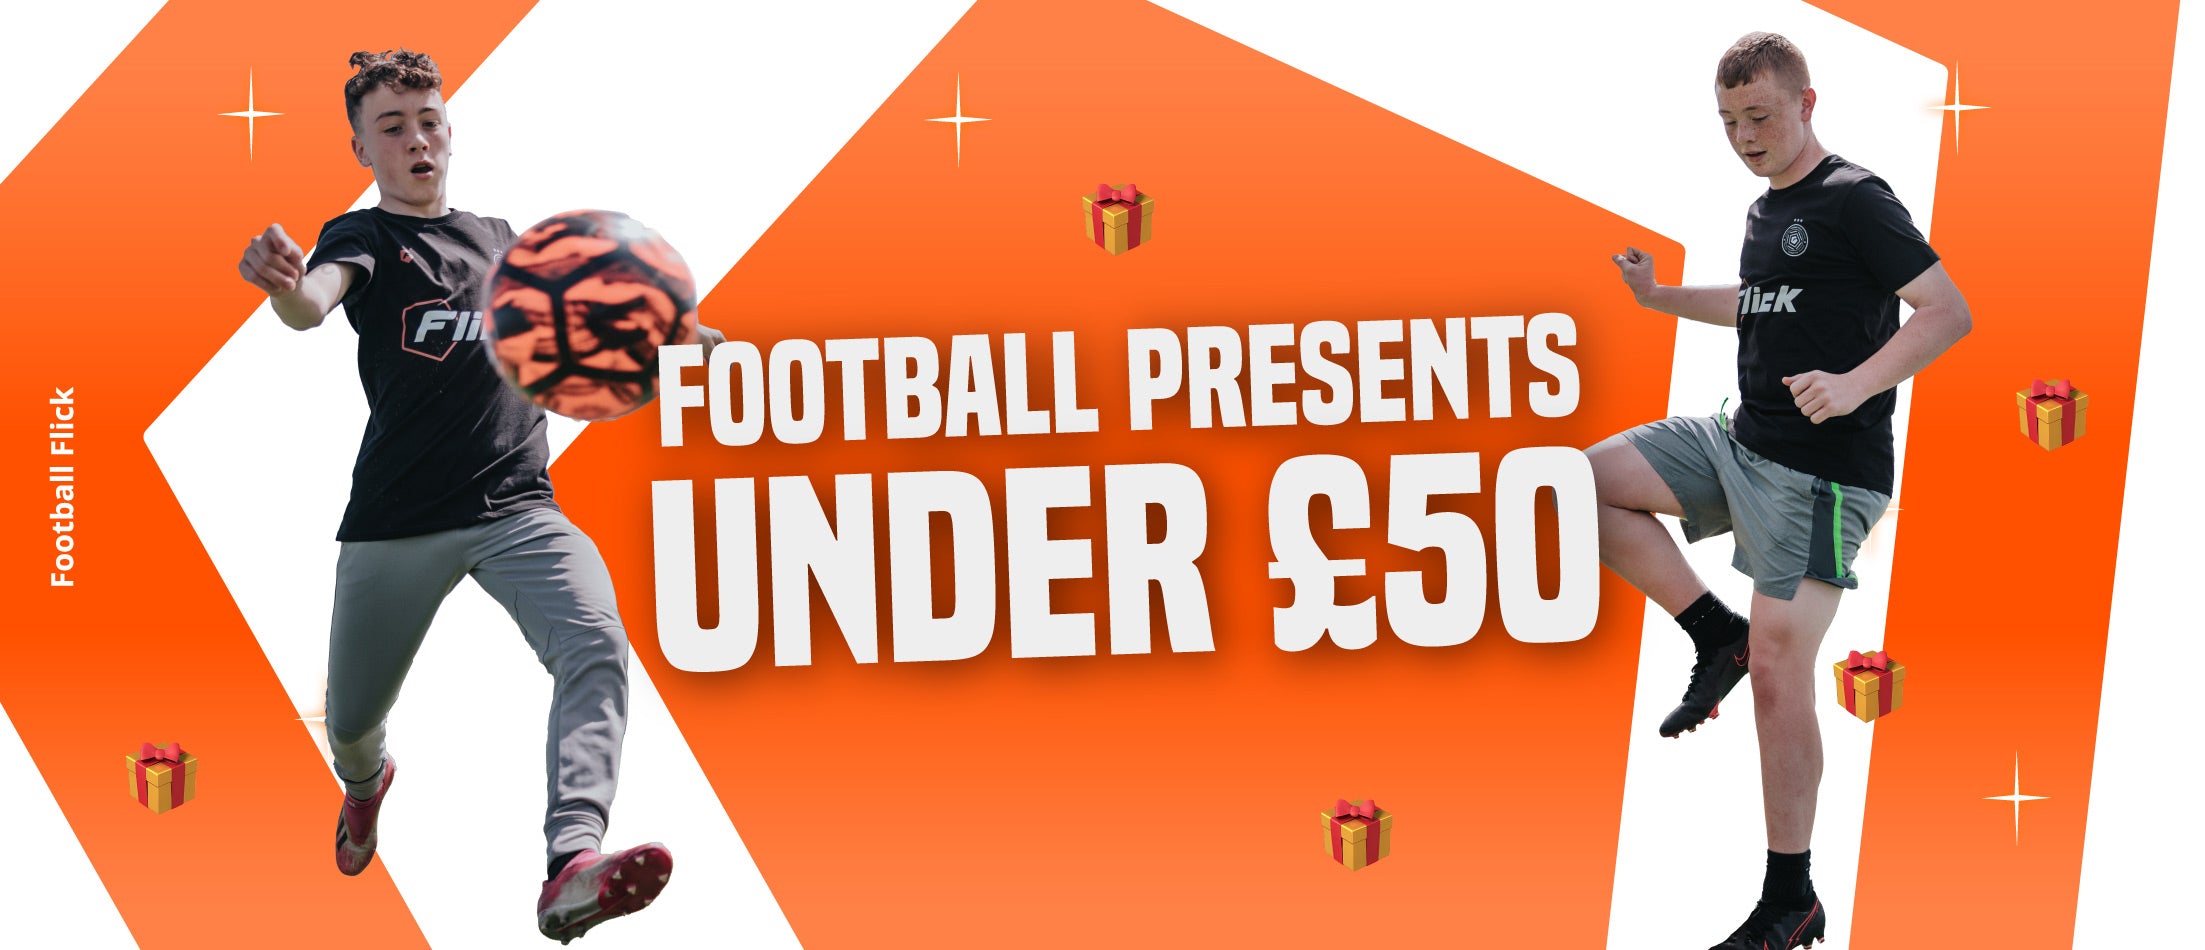 Score Big This Christmas: Football Presents for Under £50!